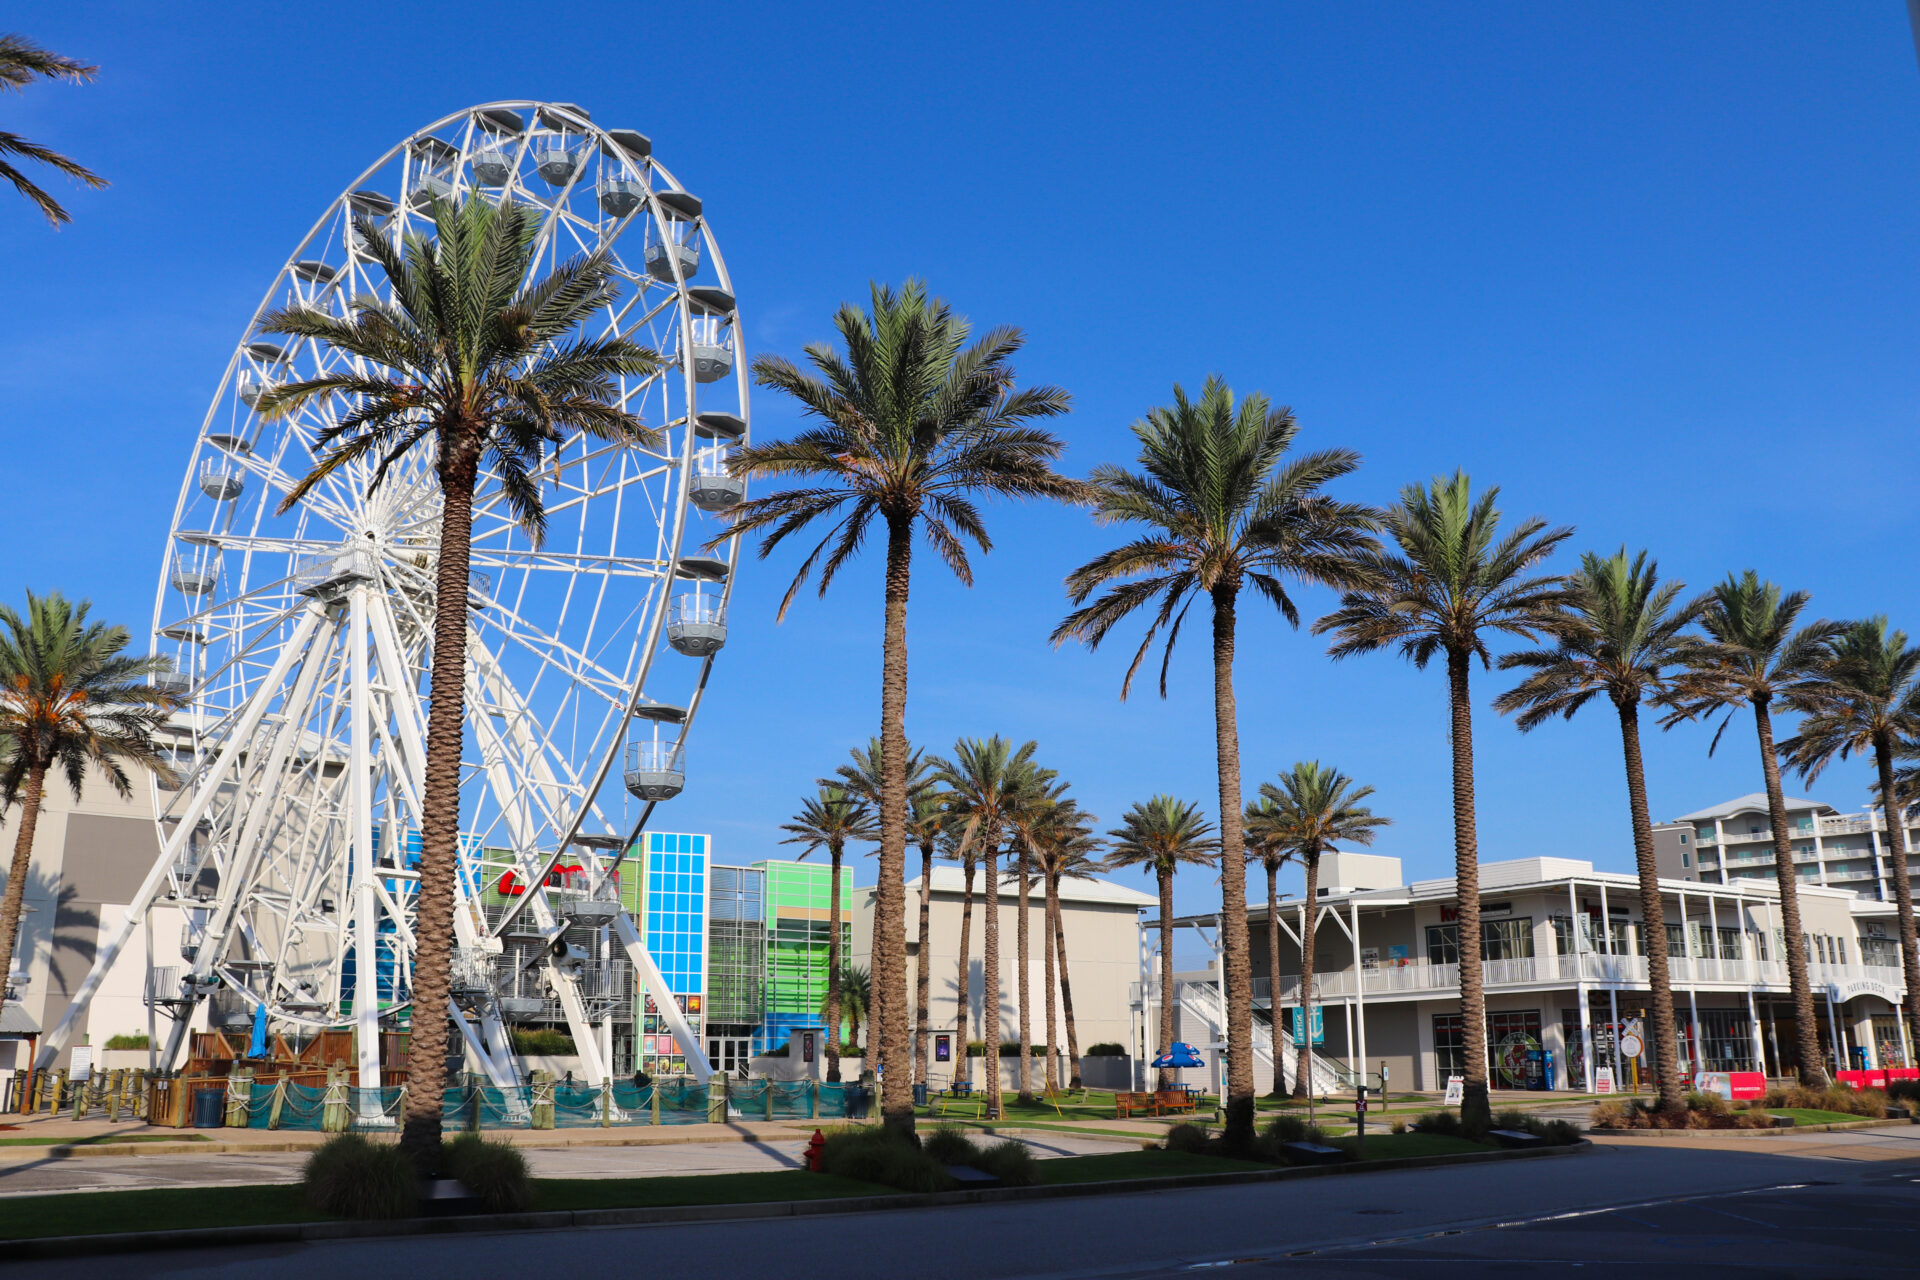 The Wharf in Orange Beach featuring tall palm trees, a ferris wheel, shopping, and dining. Photo courtesy of Gulf Shores & Orange Beach Tourism